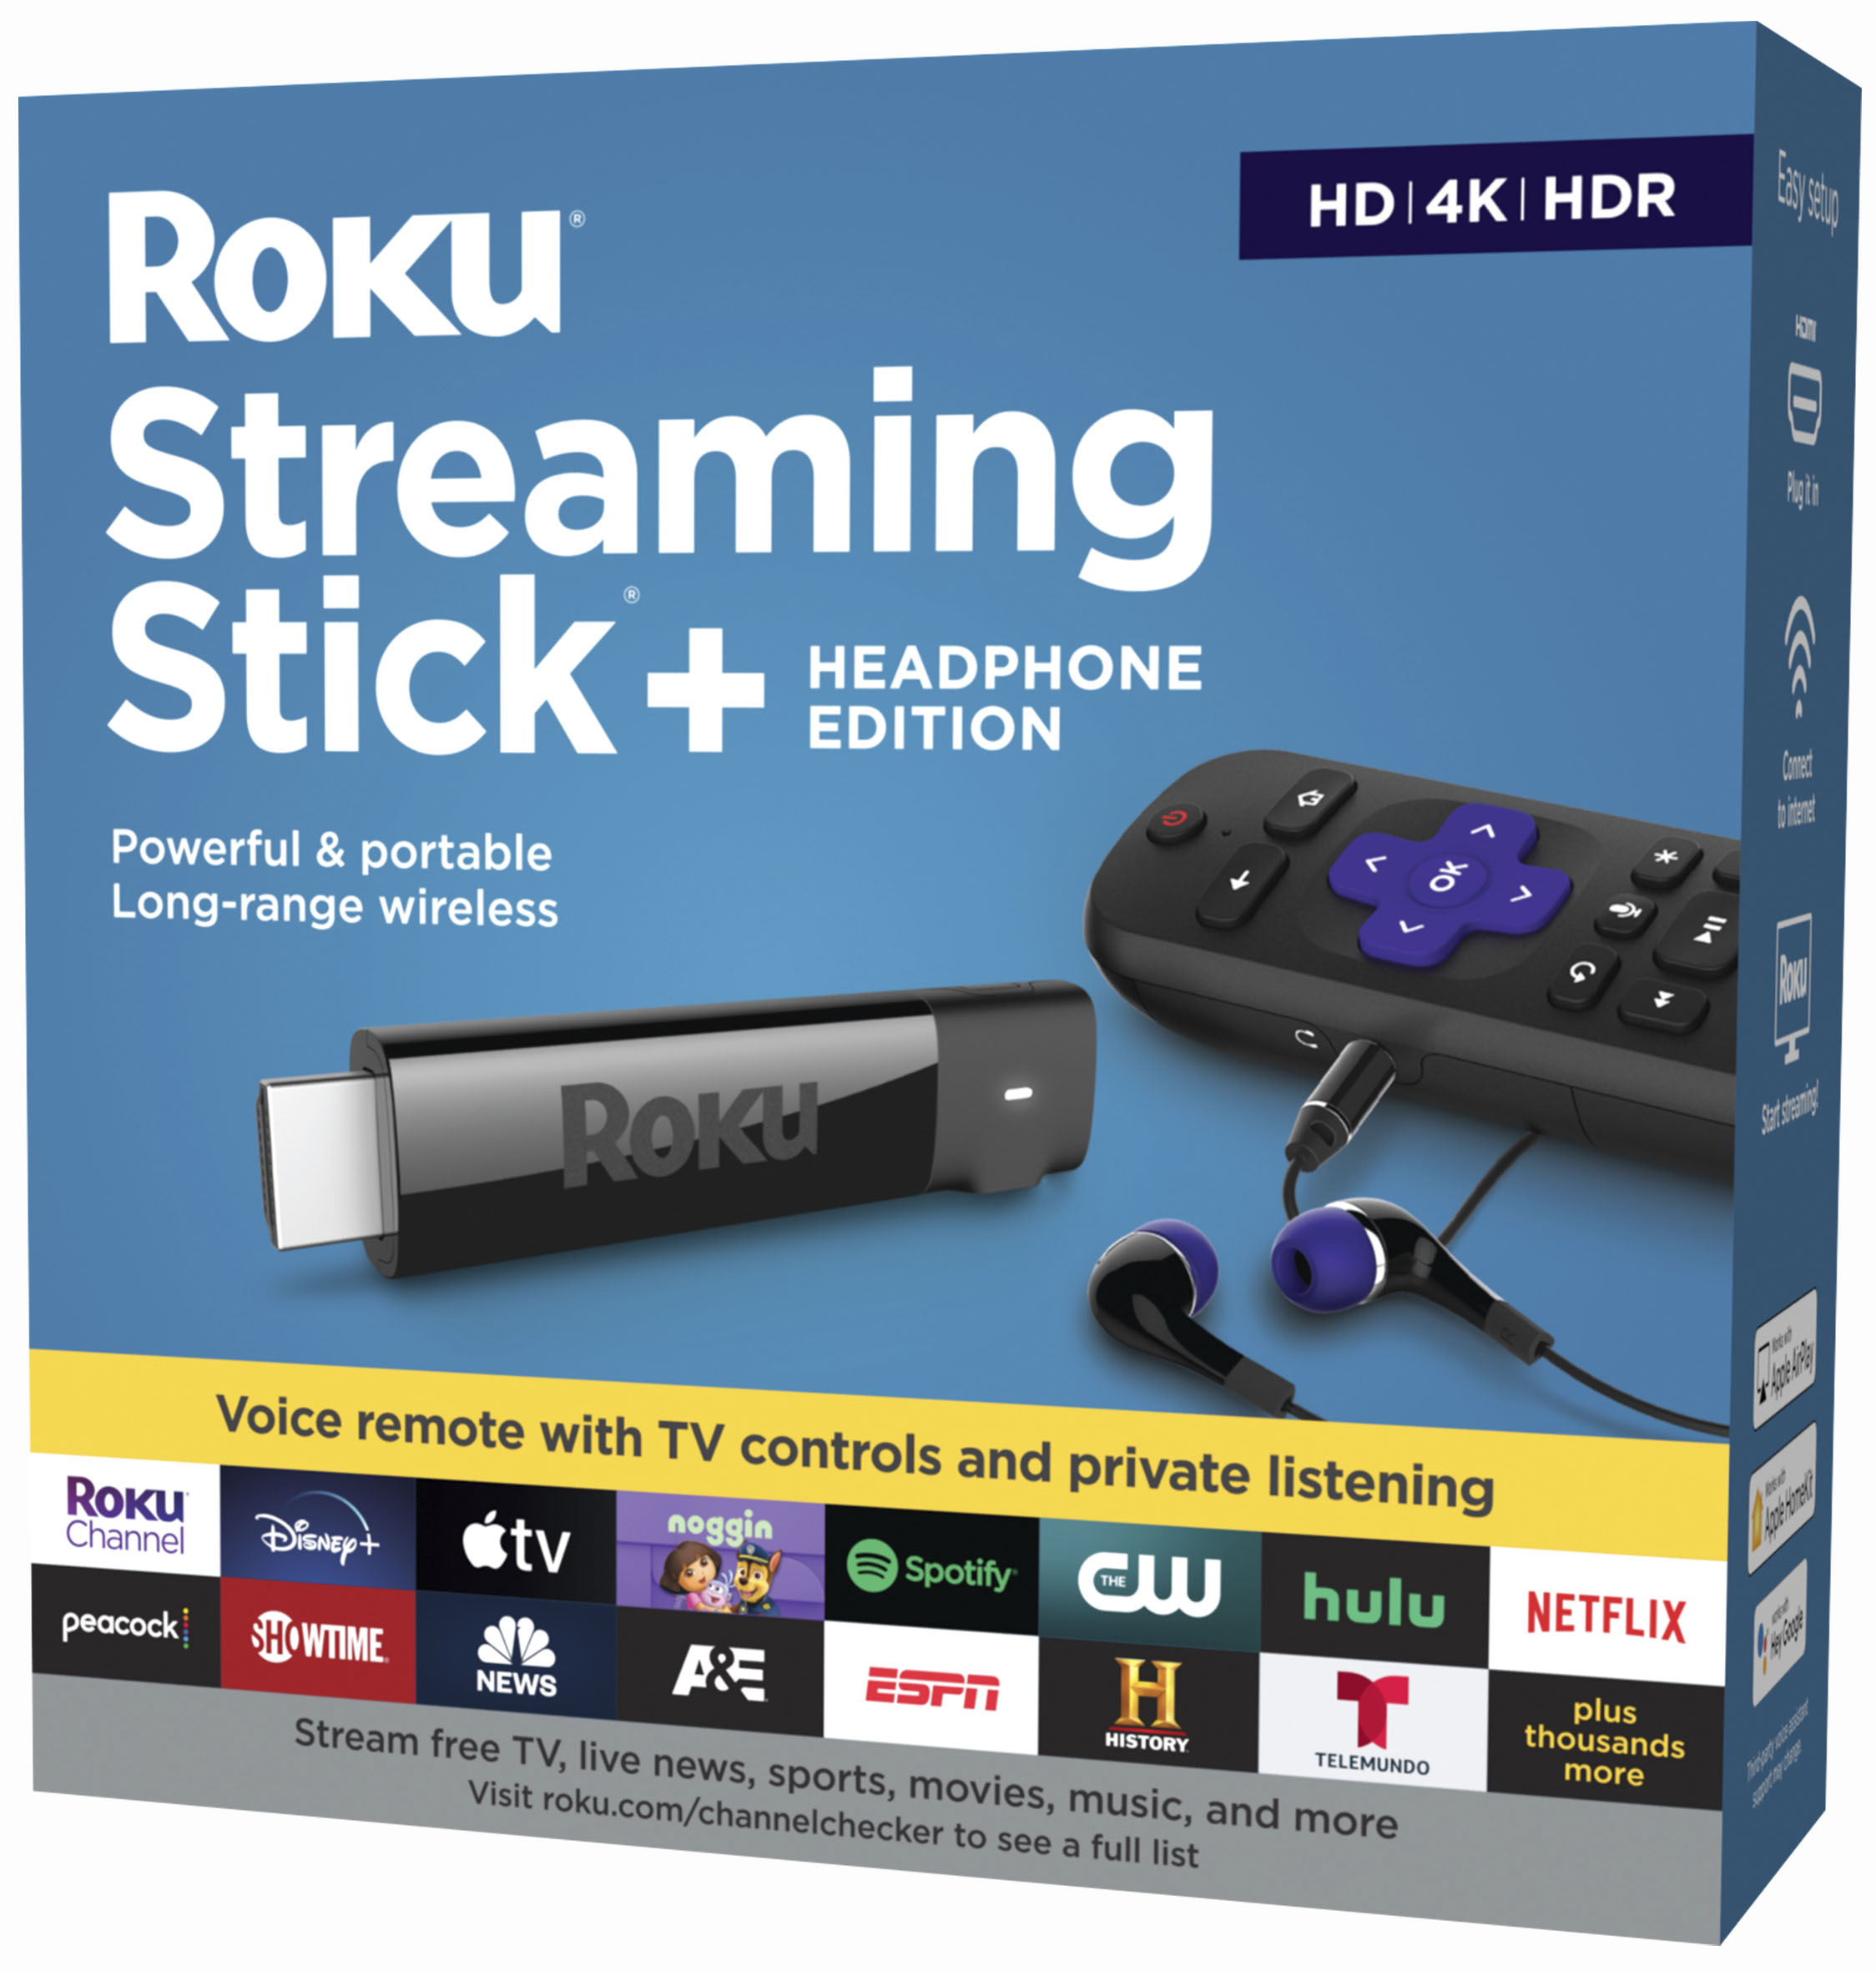 Roku Streaming Stick 4k Headphone Edition With Voice Remote With Tv Power And Volume Streaming Media Player Black 3811r Best Buy